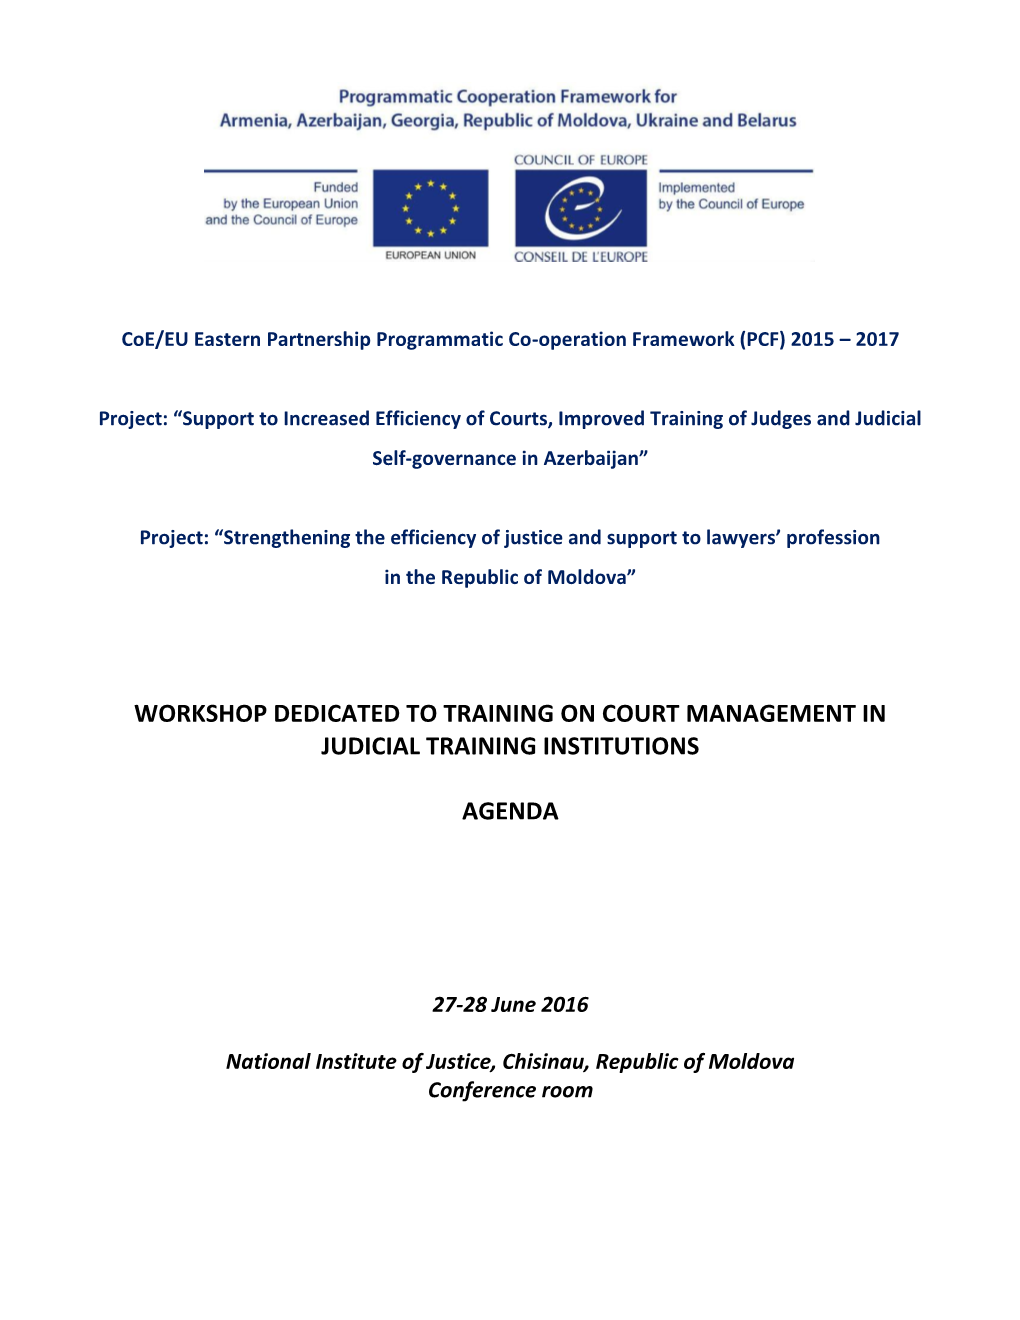 Workshop Dedicated to Training on Court Management in Judicial Training Institutions